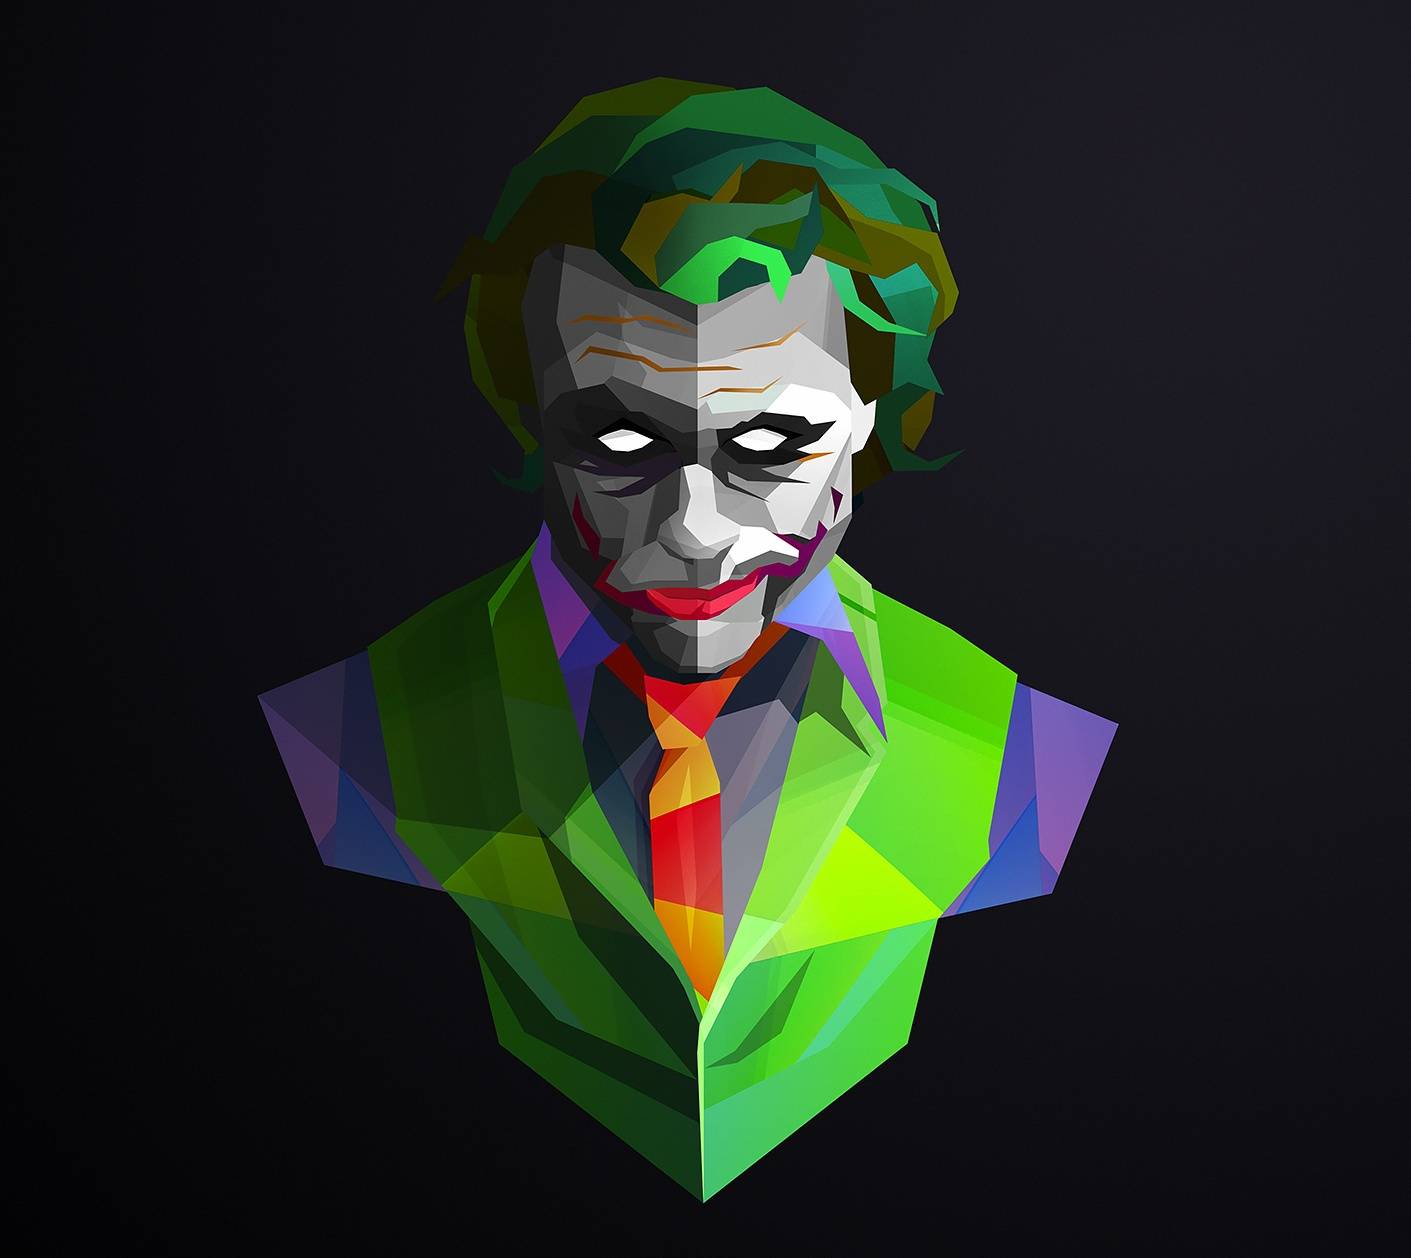 Download free joker hd wallpapers for your mobile phone